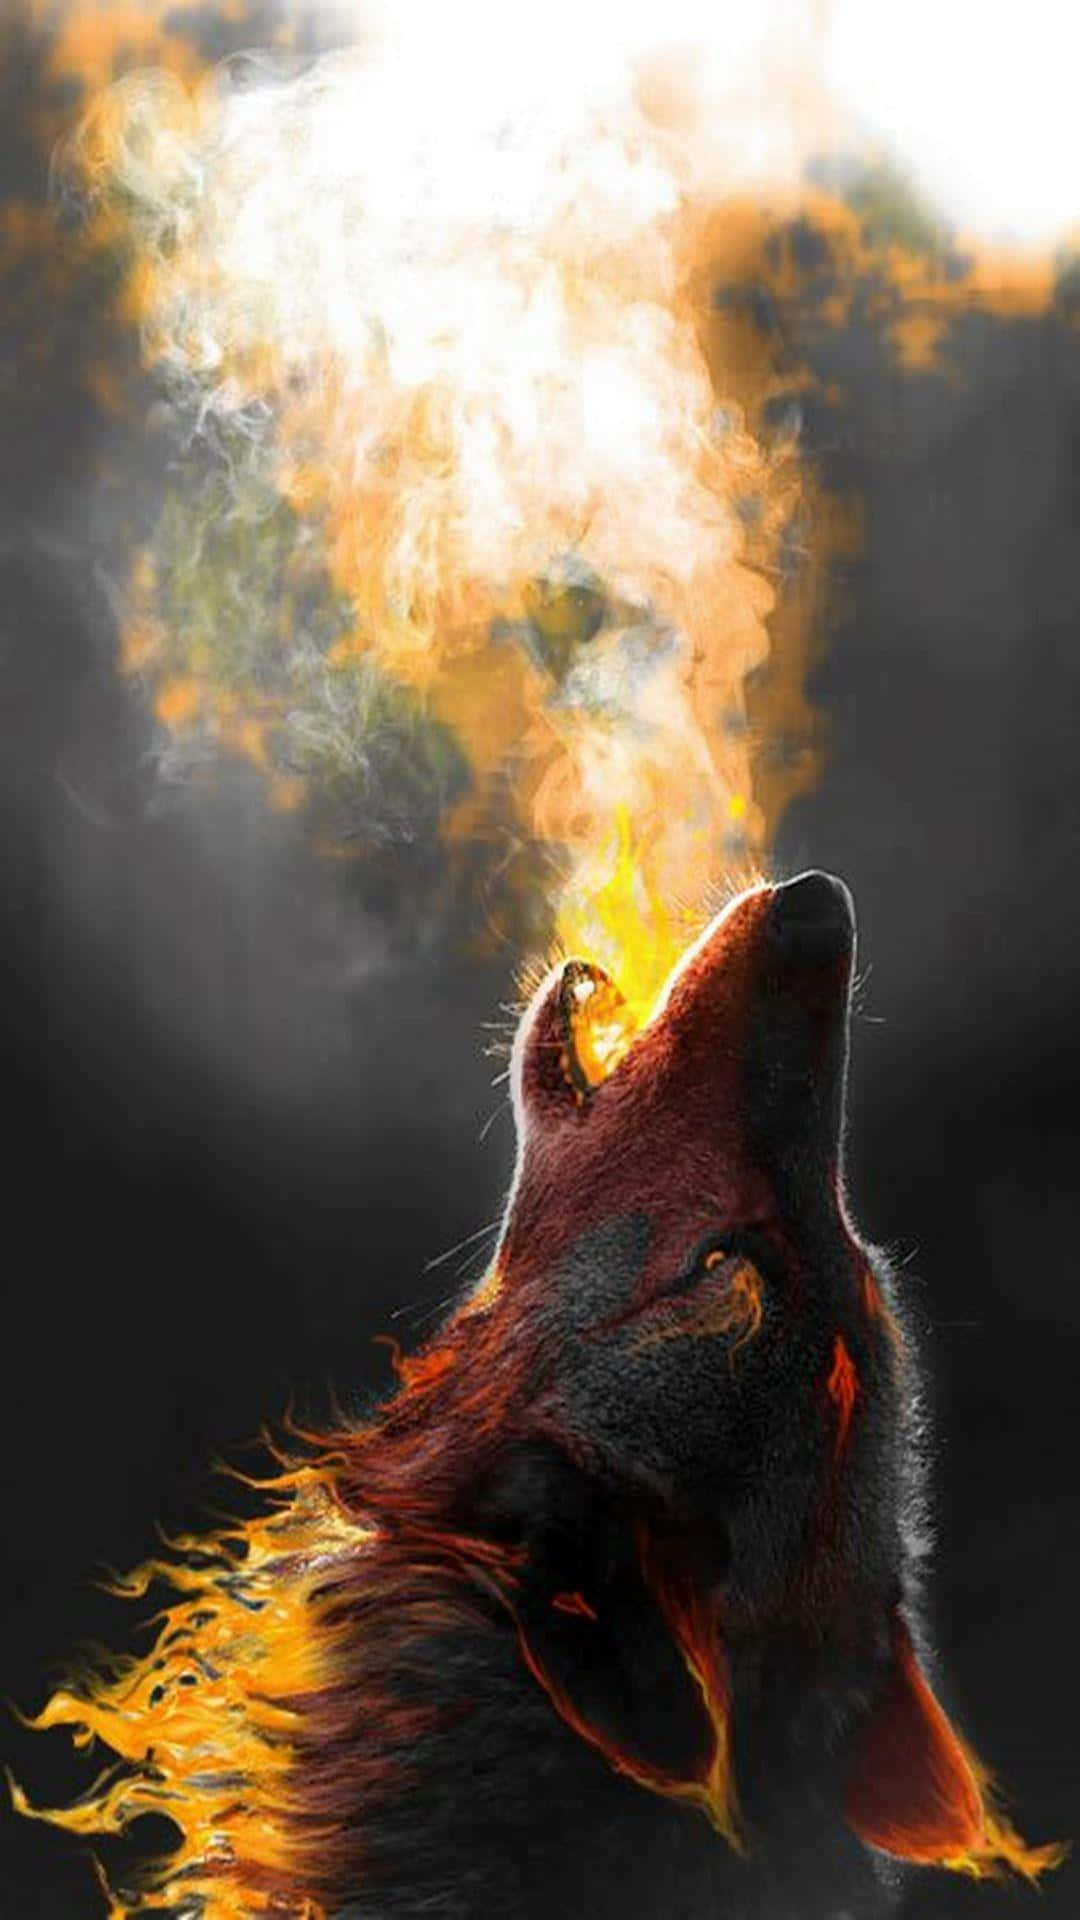 Ice Fire Wolf Wallpaper Apk Download for Android- Latest version 2.10-  com.tpc.ice.fire.wolf.wallpaper